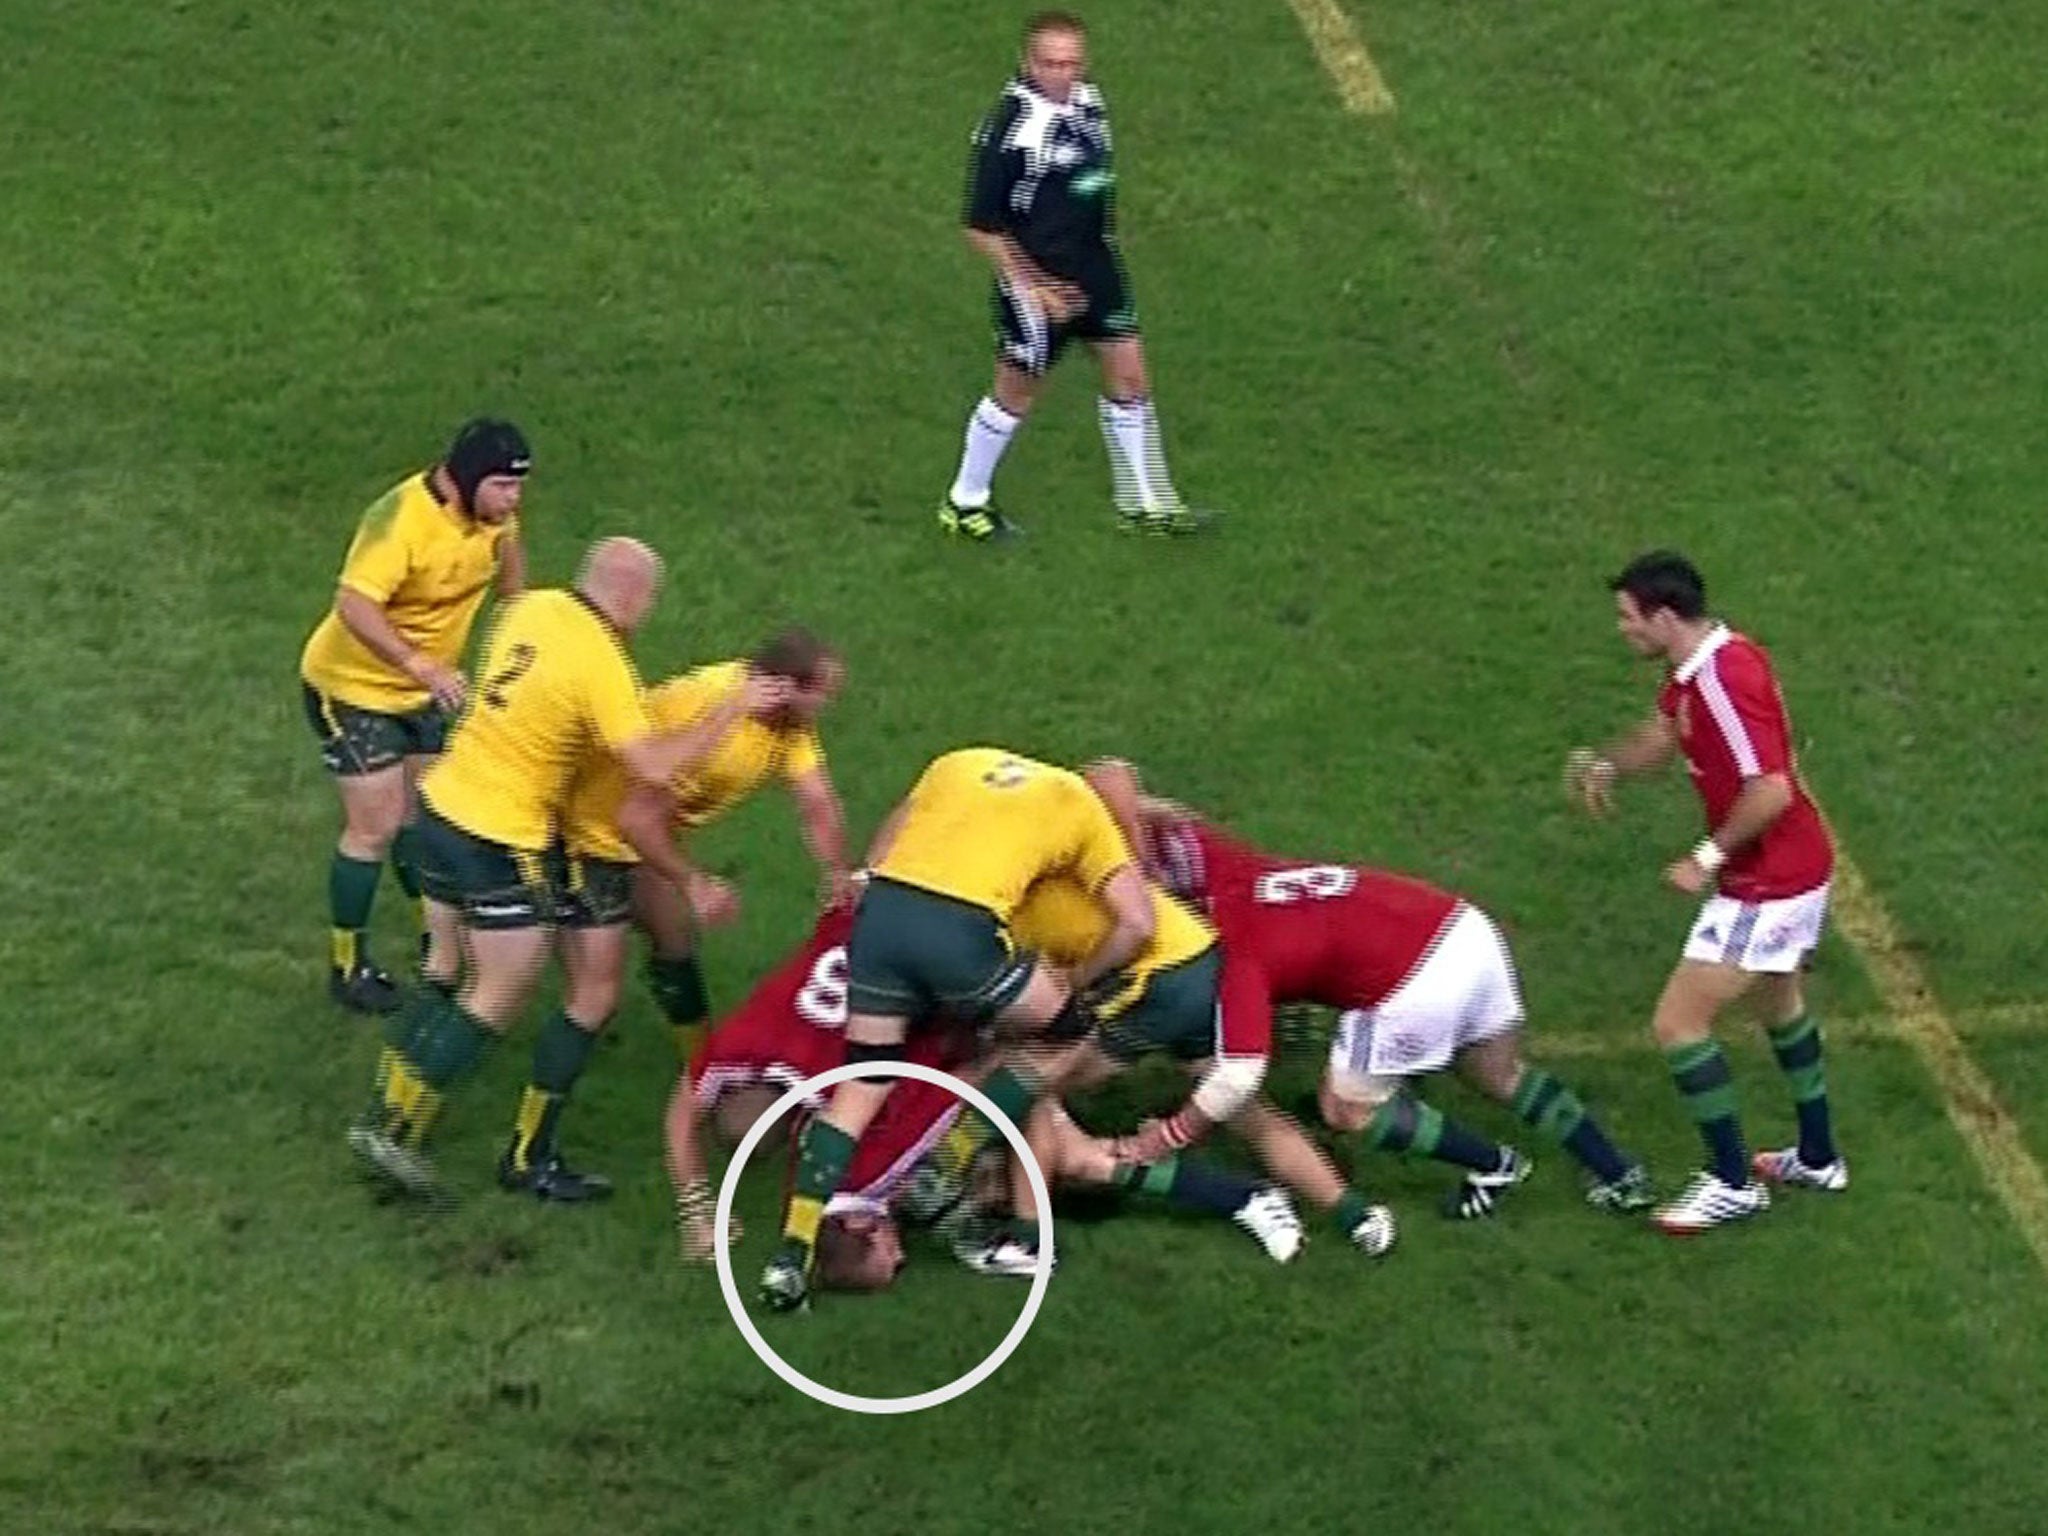 James Horwill’s foot was said only to have glanced Alun Wyn Jones